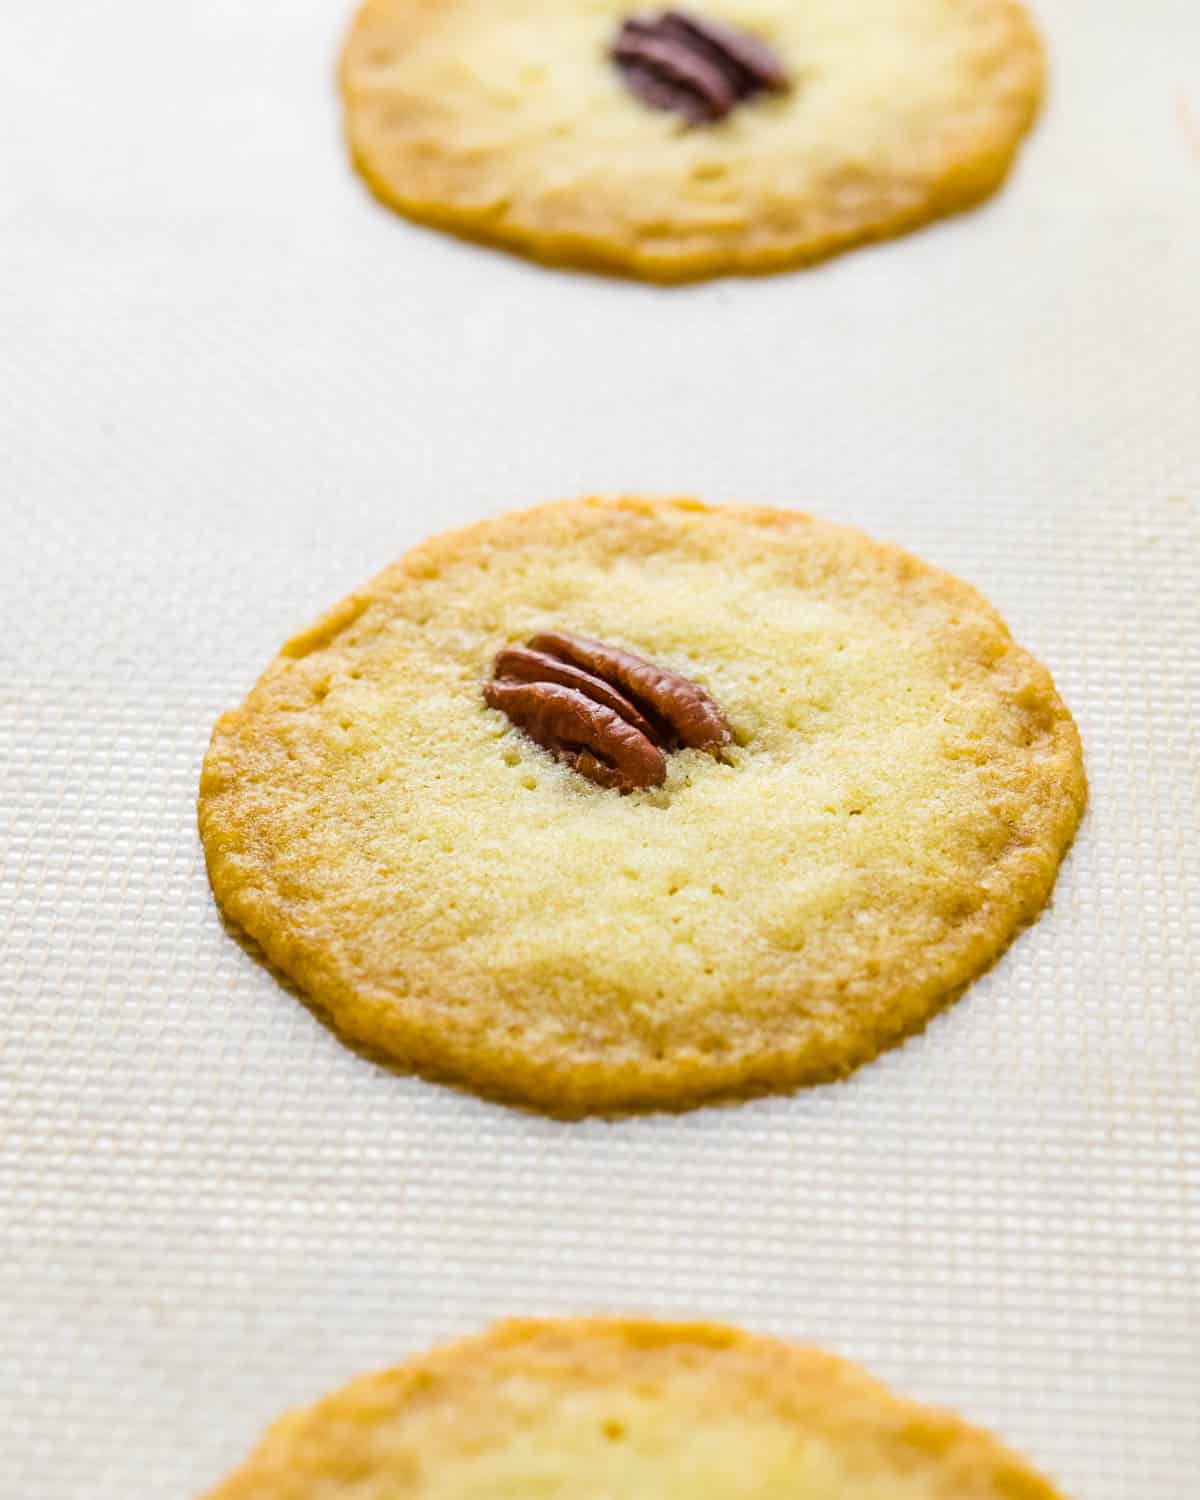 The baked cookie which spreads out to be super thin and crispy.